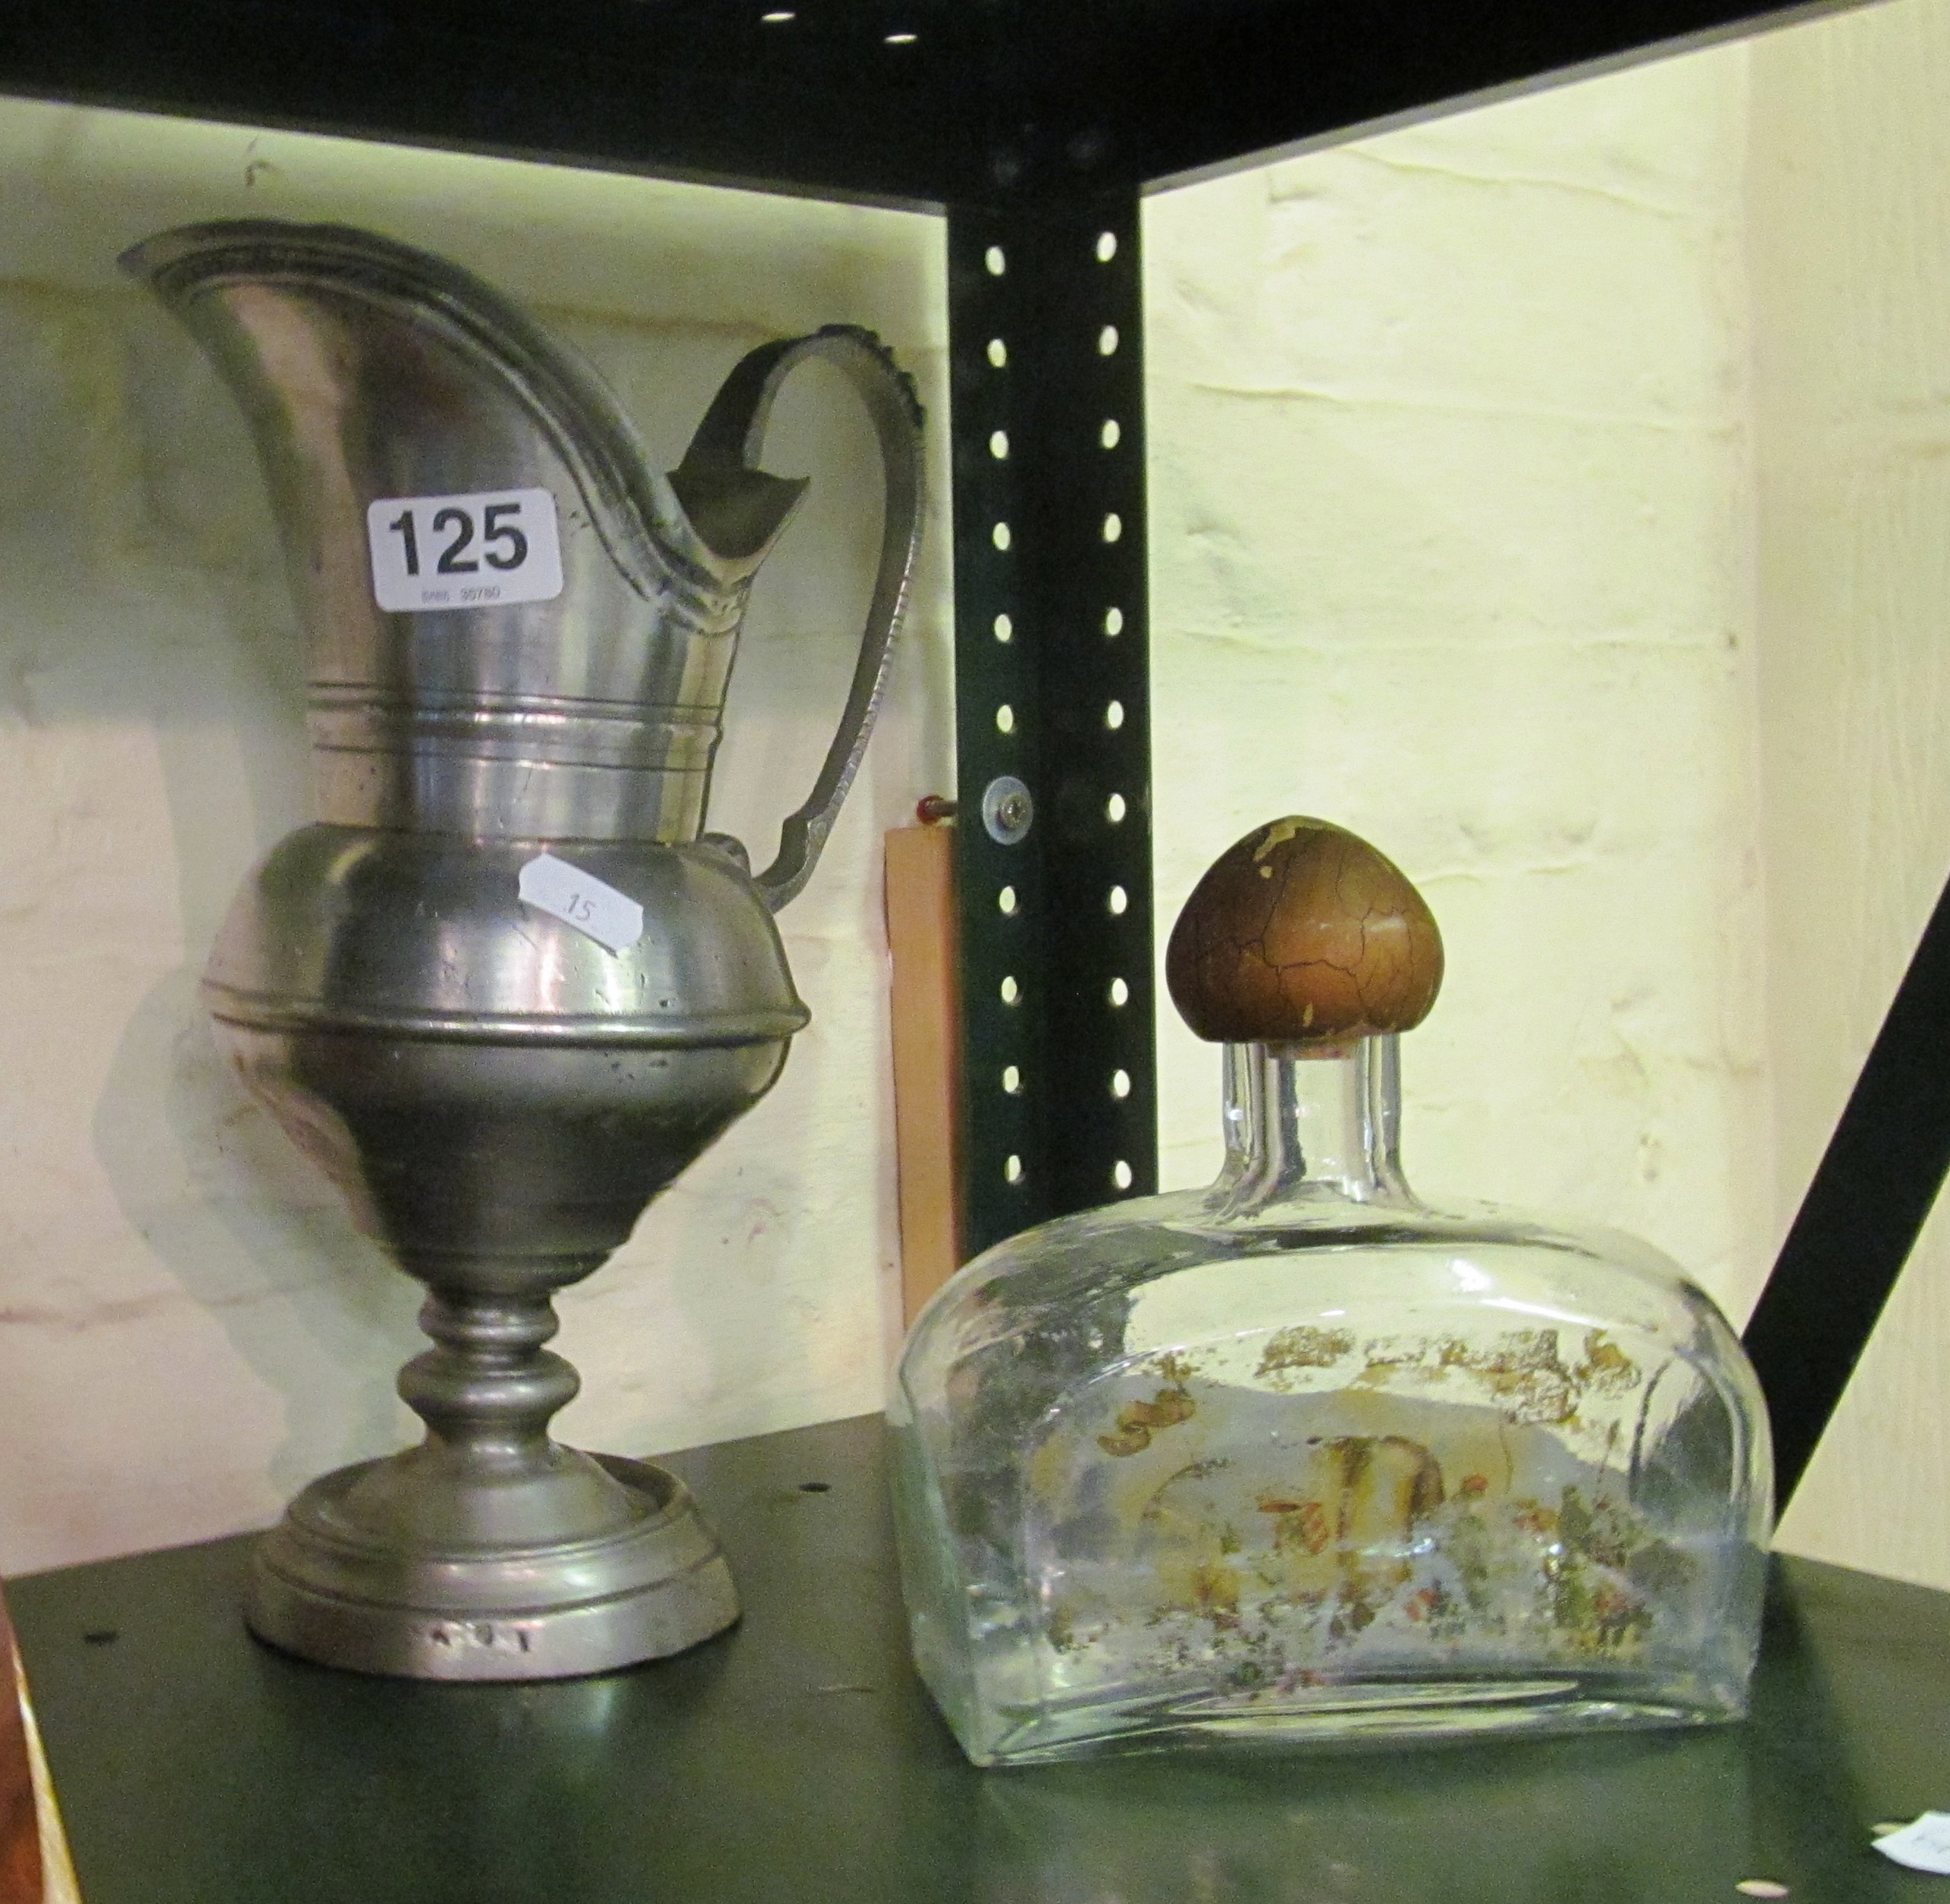 A pewter jug and a glass bottle flask